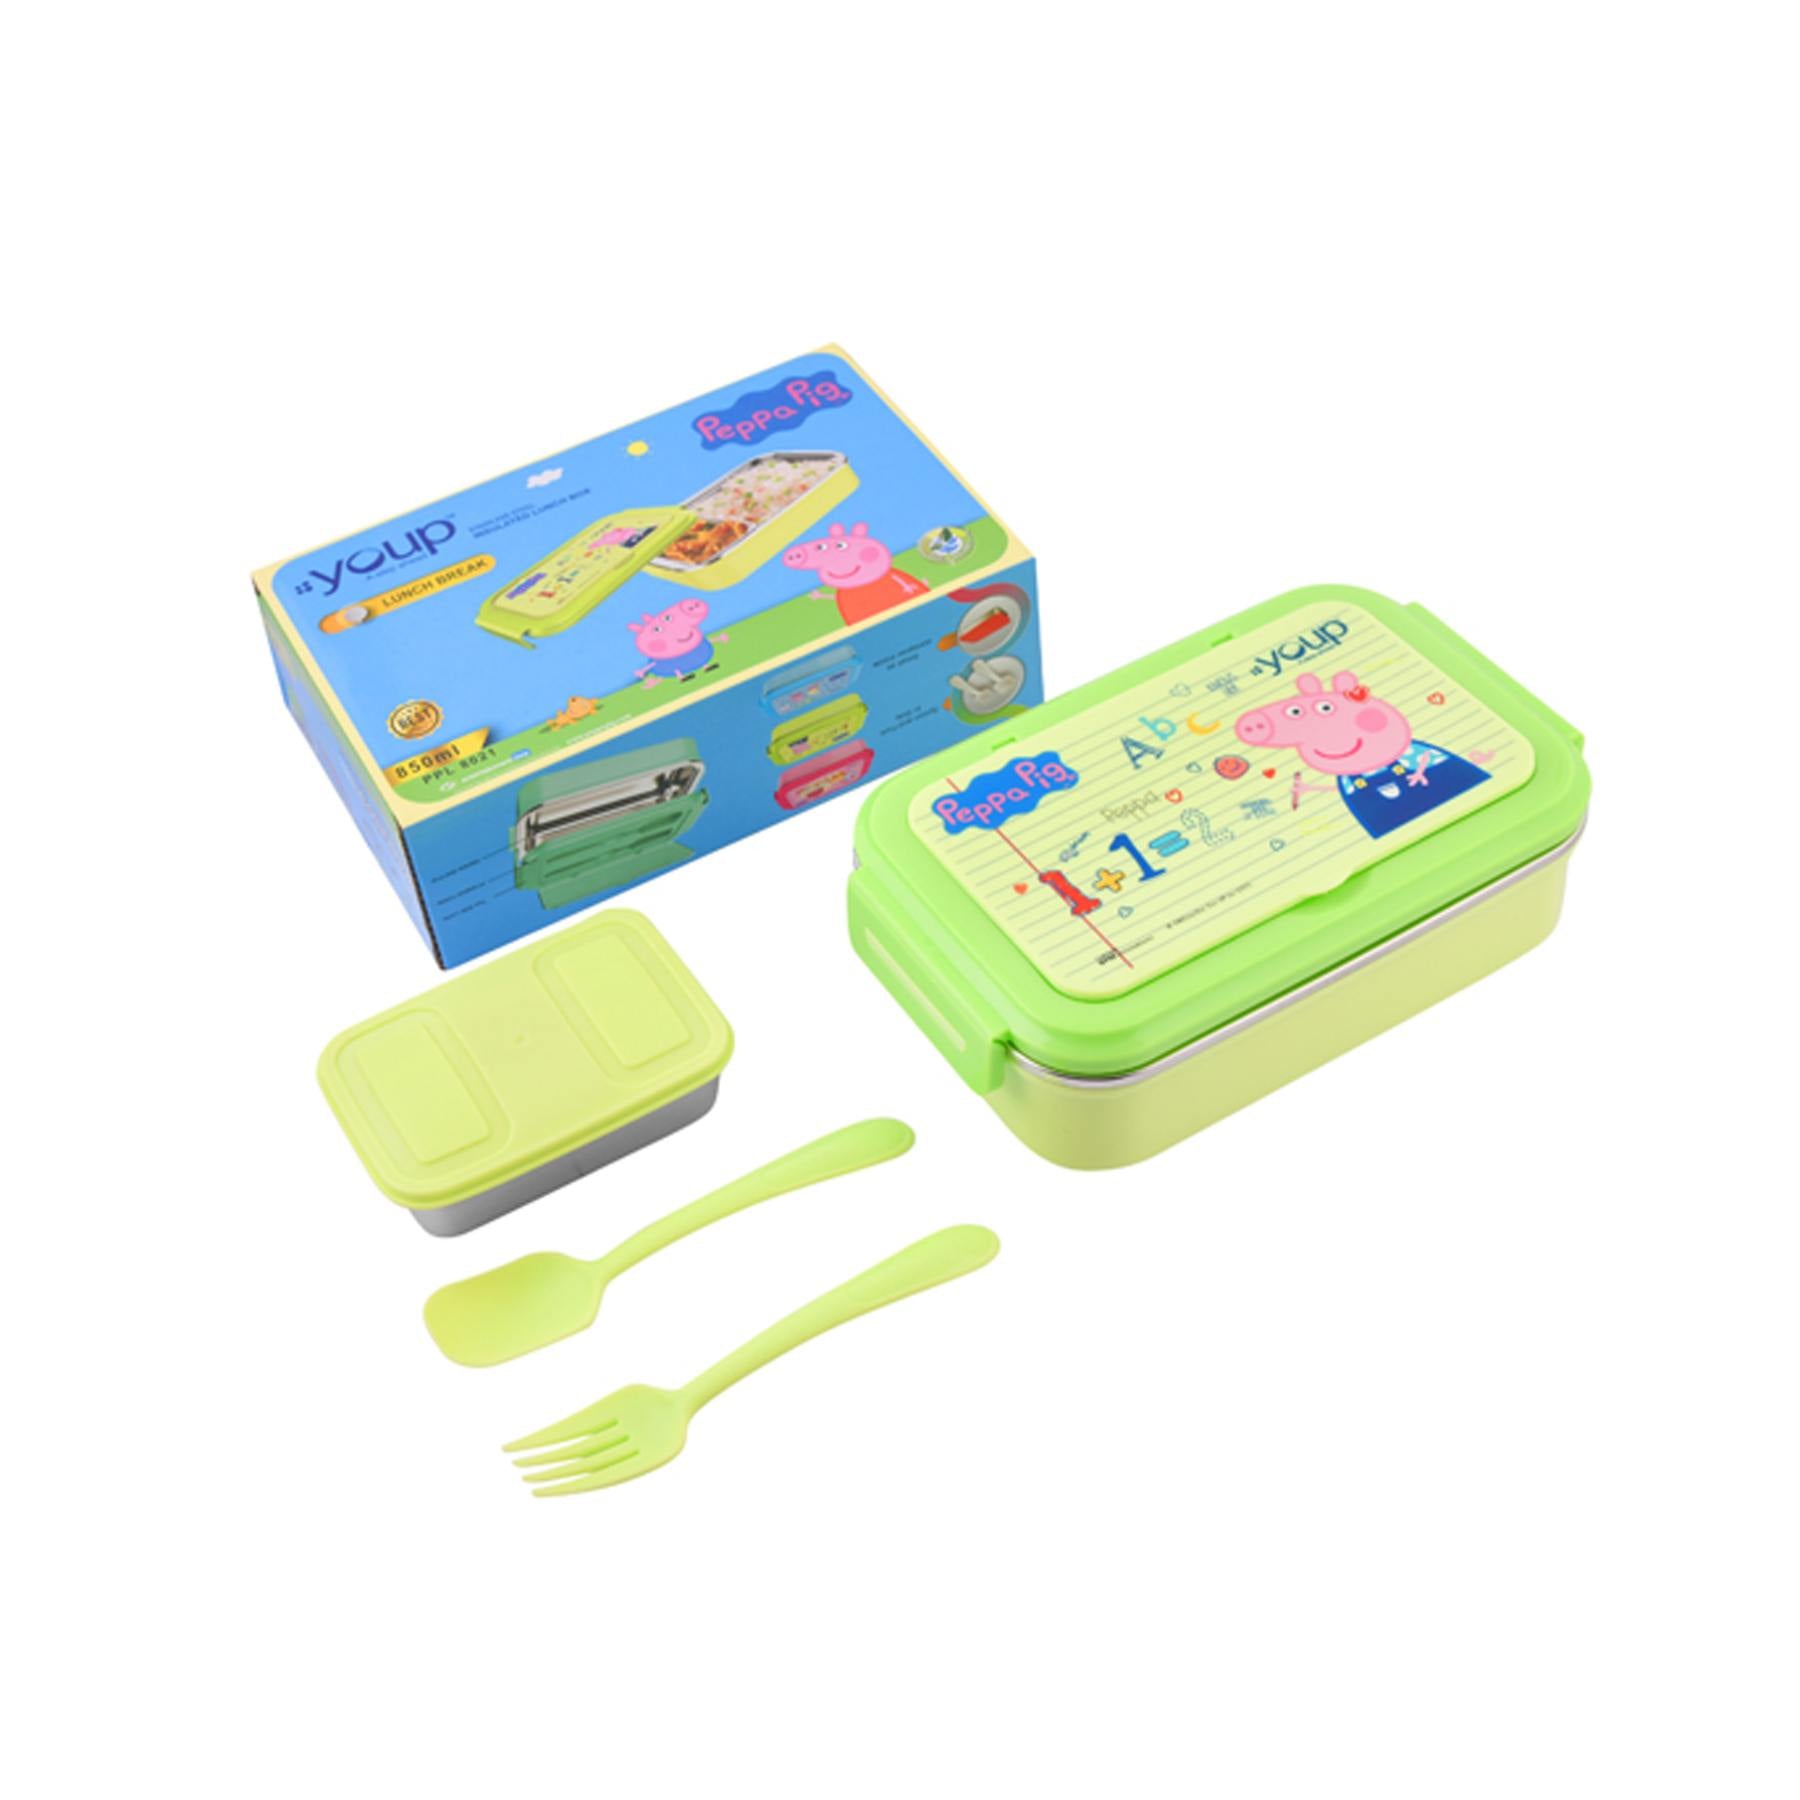 Youp Stainless Steel Lime Green Color Peppa Pig Kids Lunch Box Lunch Break - 850 Ml